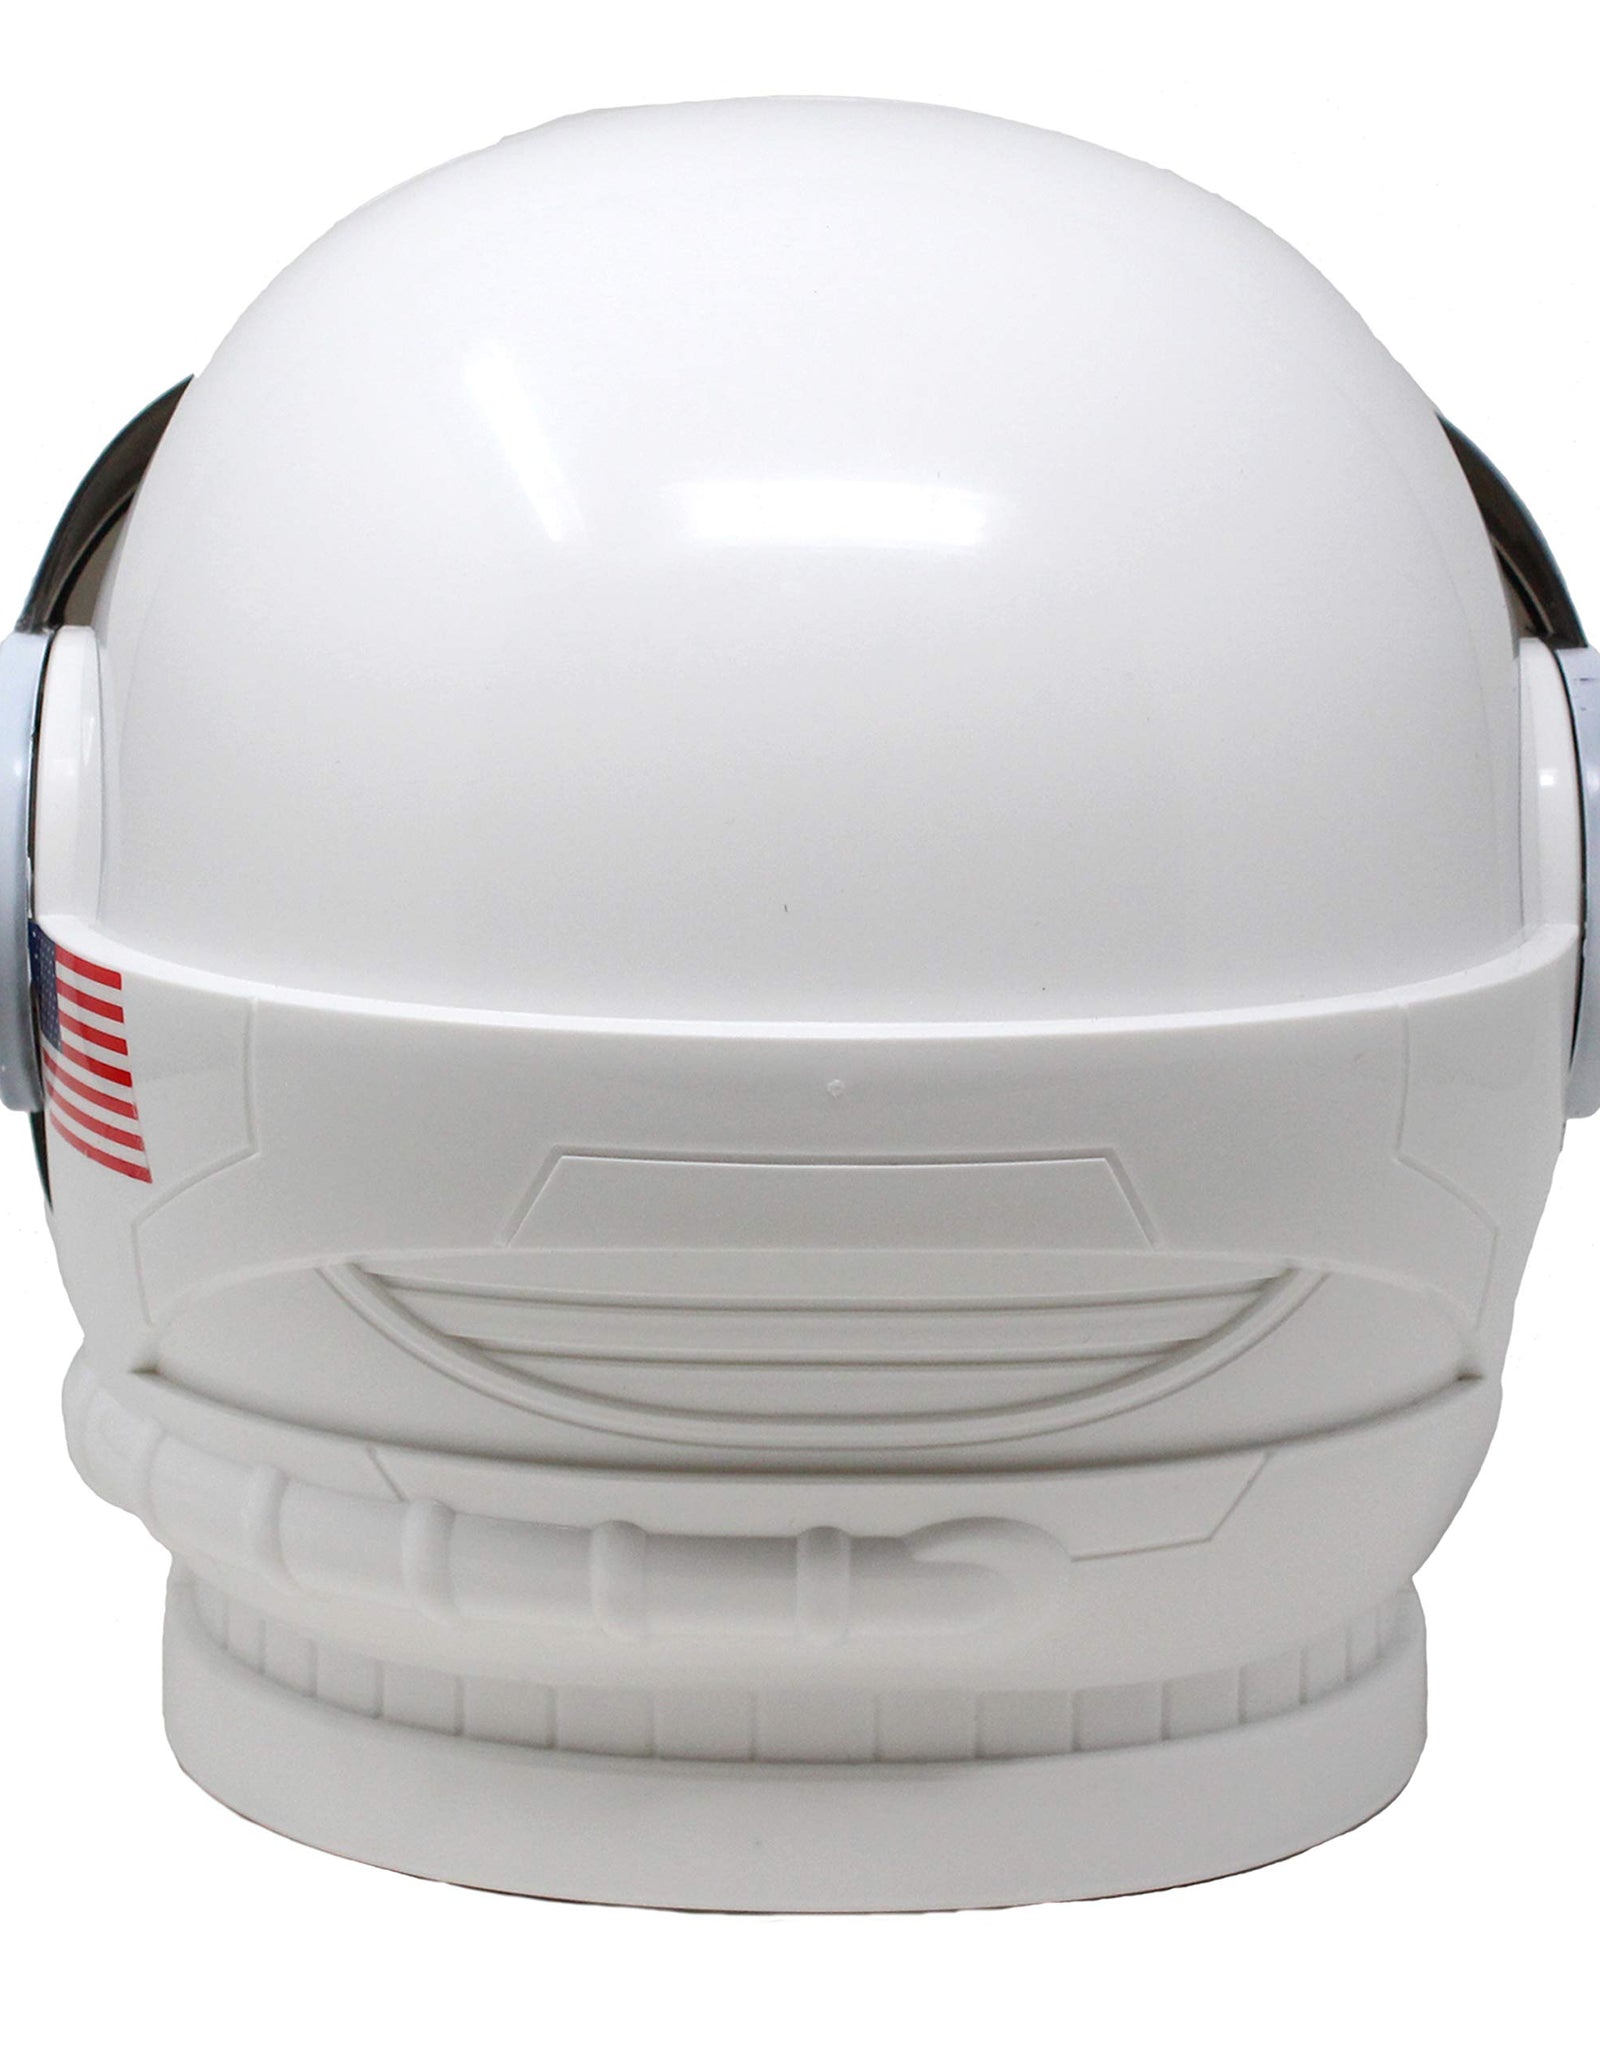 Astronaut Helmet with Movable Visor Pretend Play Toy Set for School Classroom Dress Up, Role Play Accessory, Stocking, Birthday Party Favor Supplies, Girls, Boys, Kids and Toddler. White